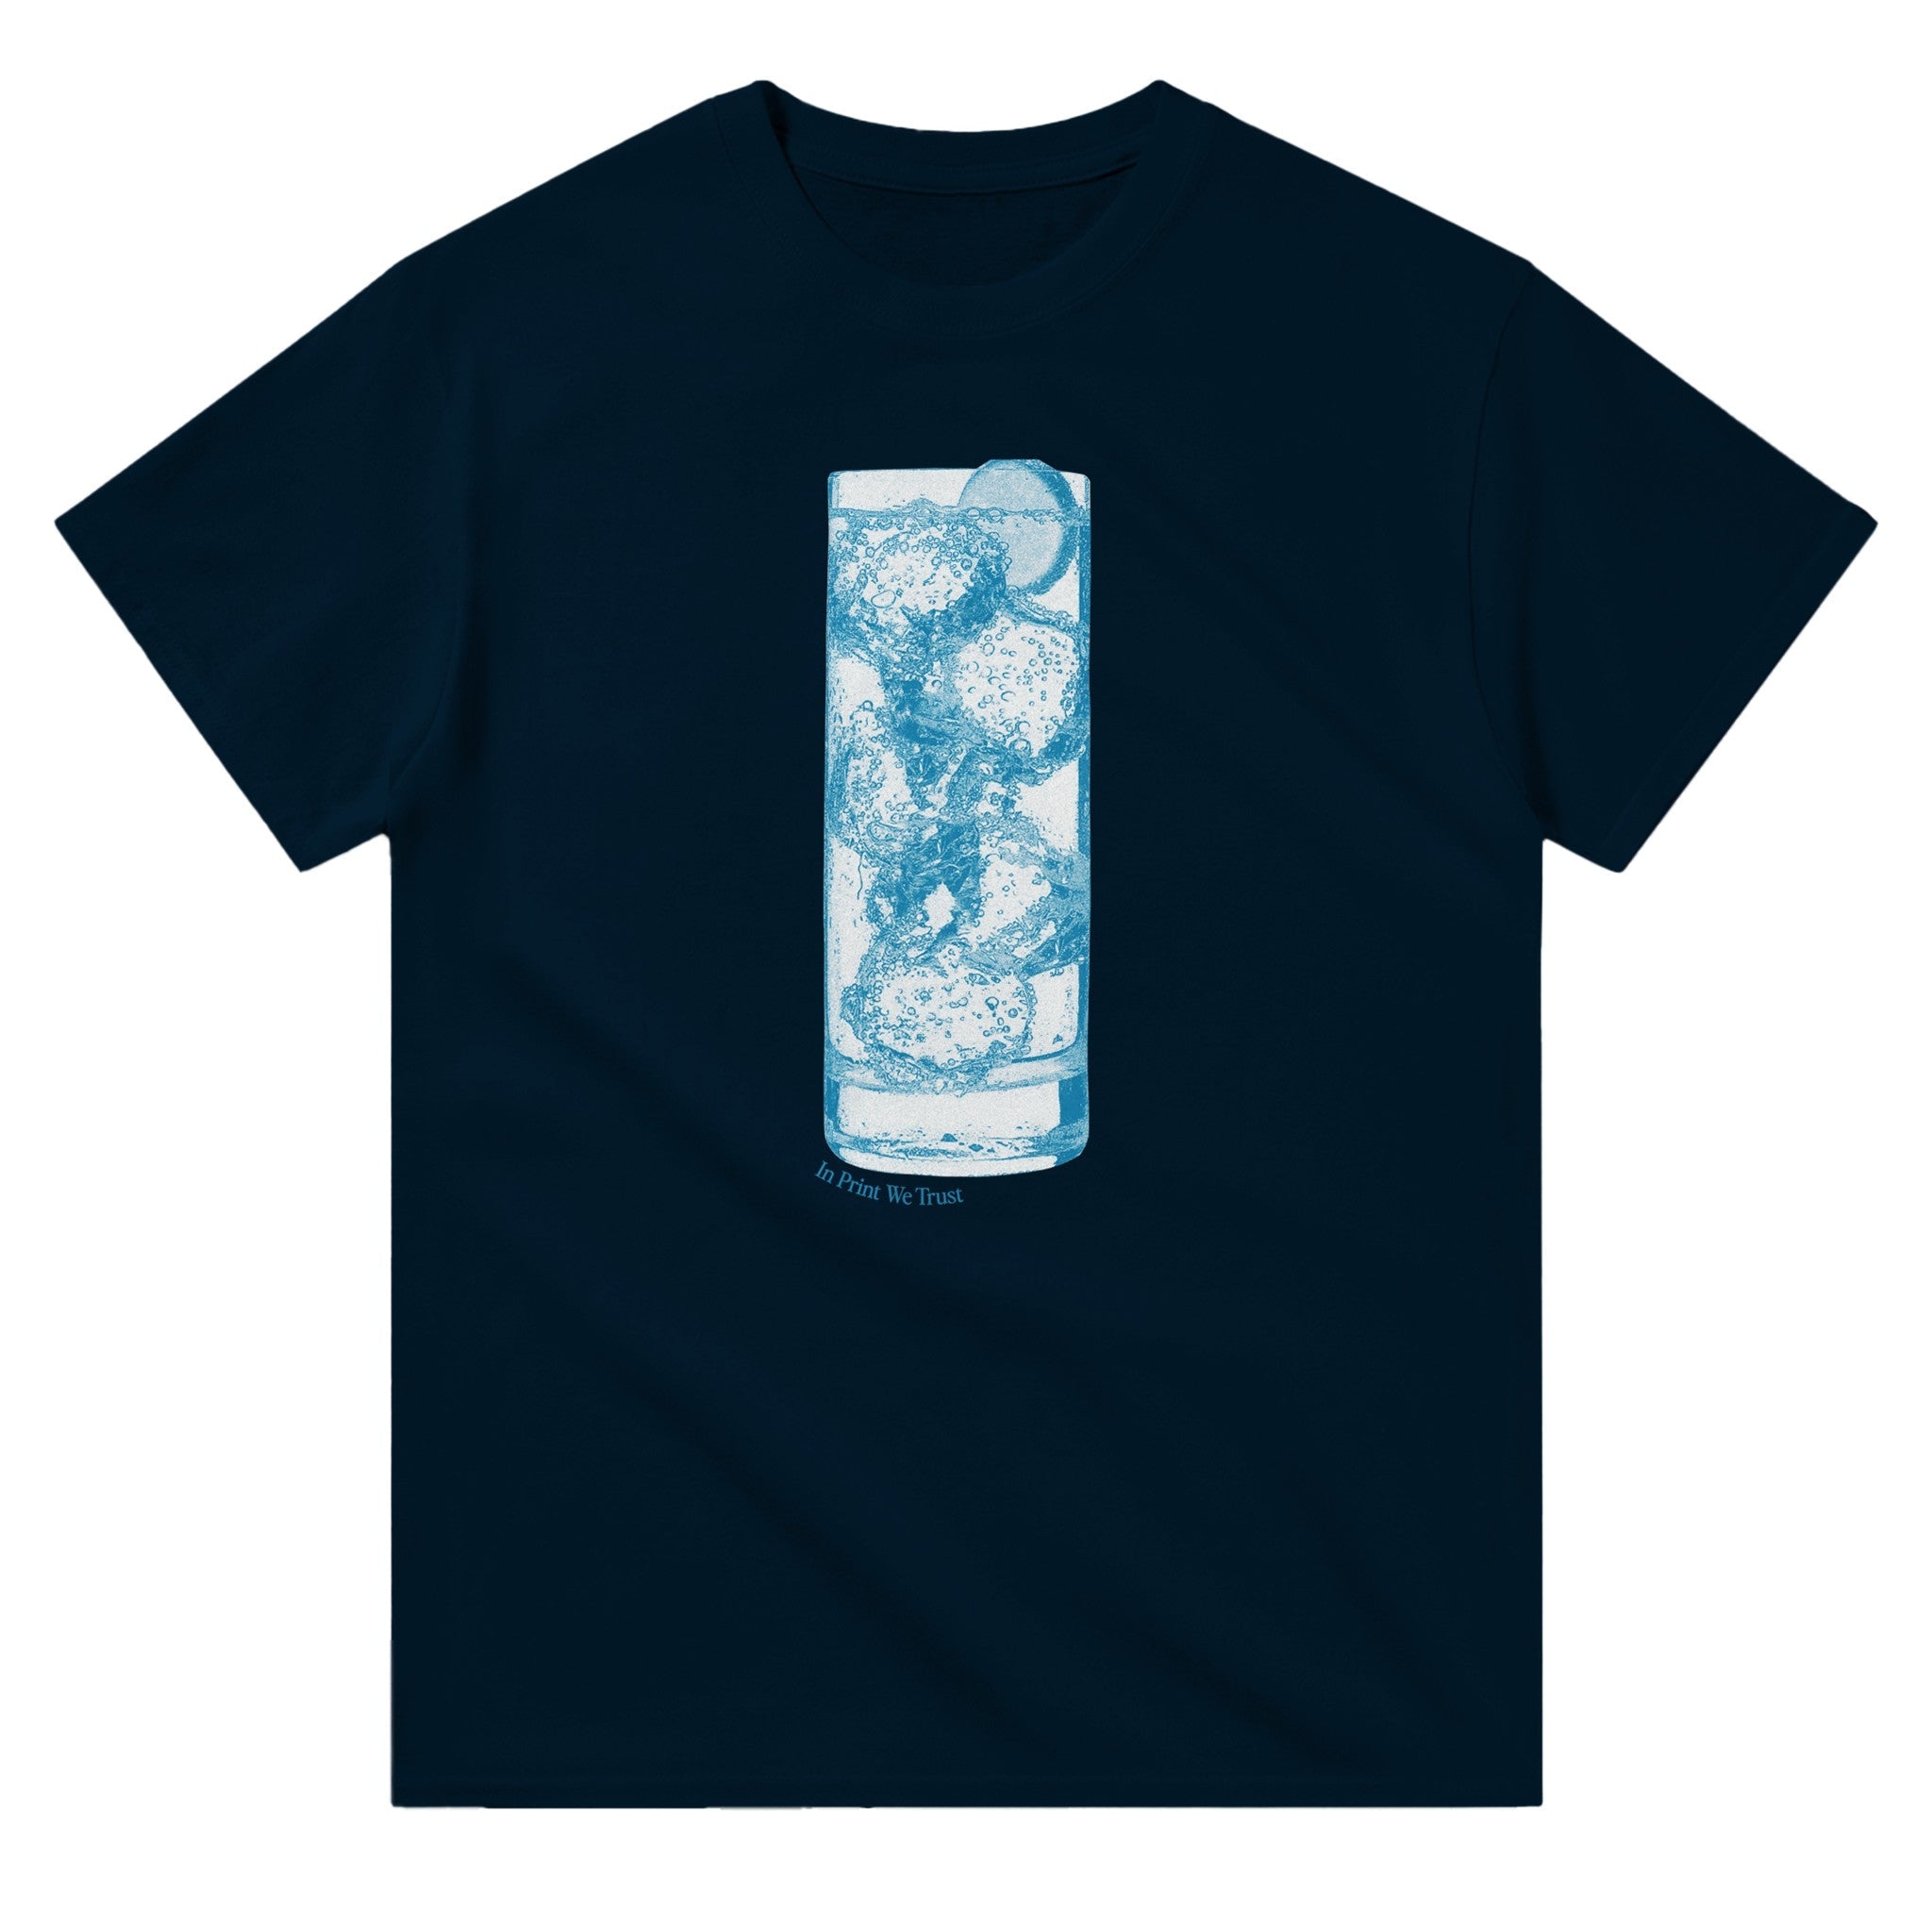 'Tall Glass of Water' classic tee - In Print We Trust